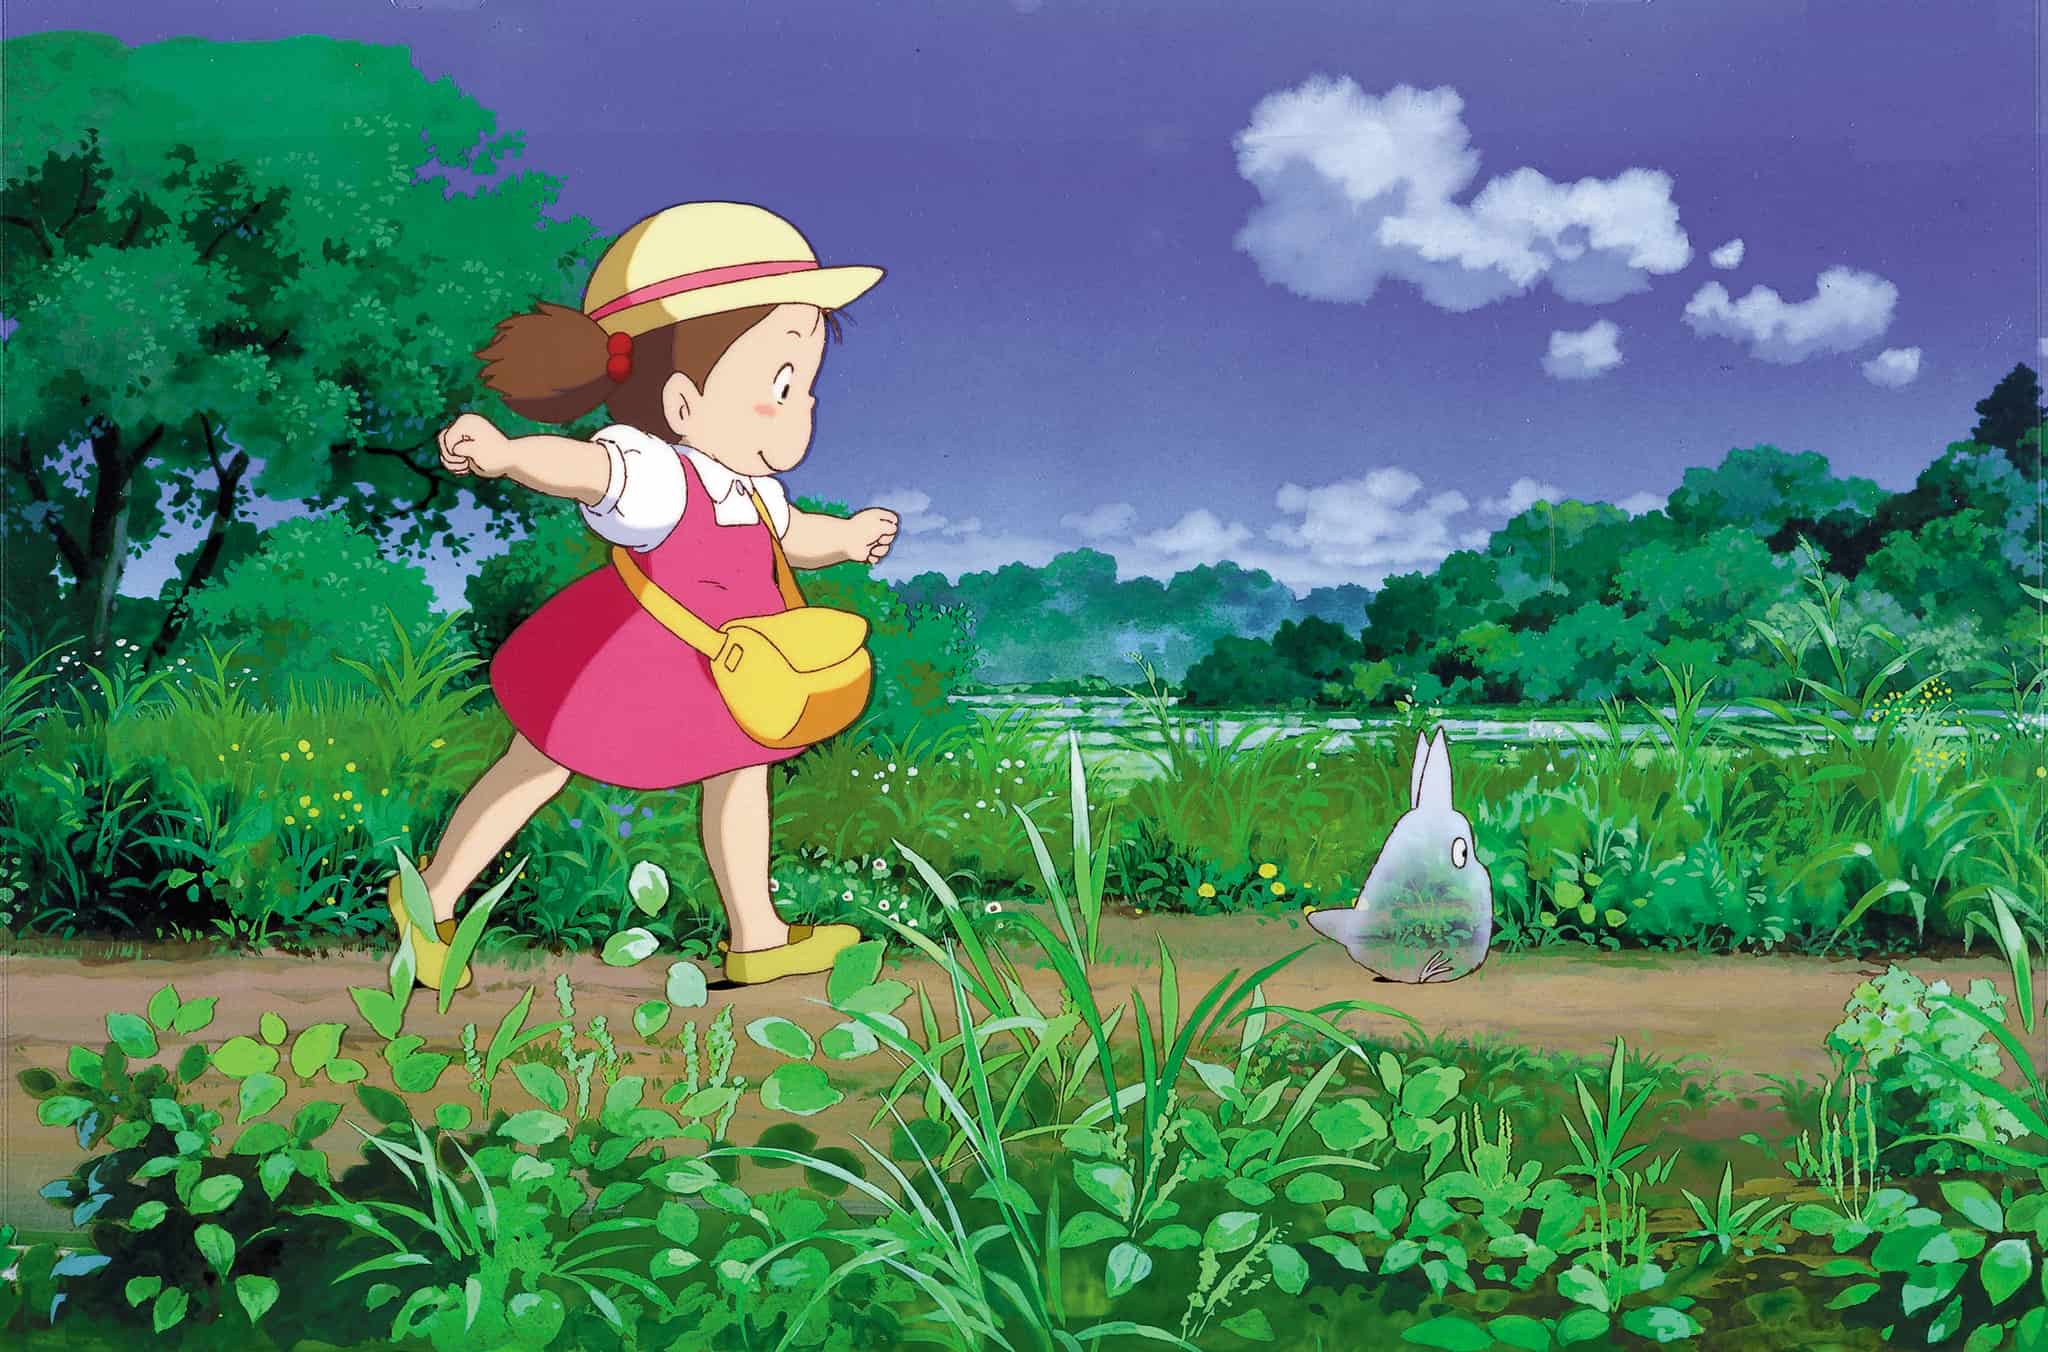 Anime young girl walking behind a transparent forest creature in this image from Studio Ghibli